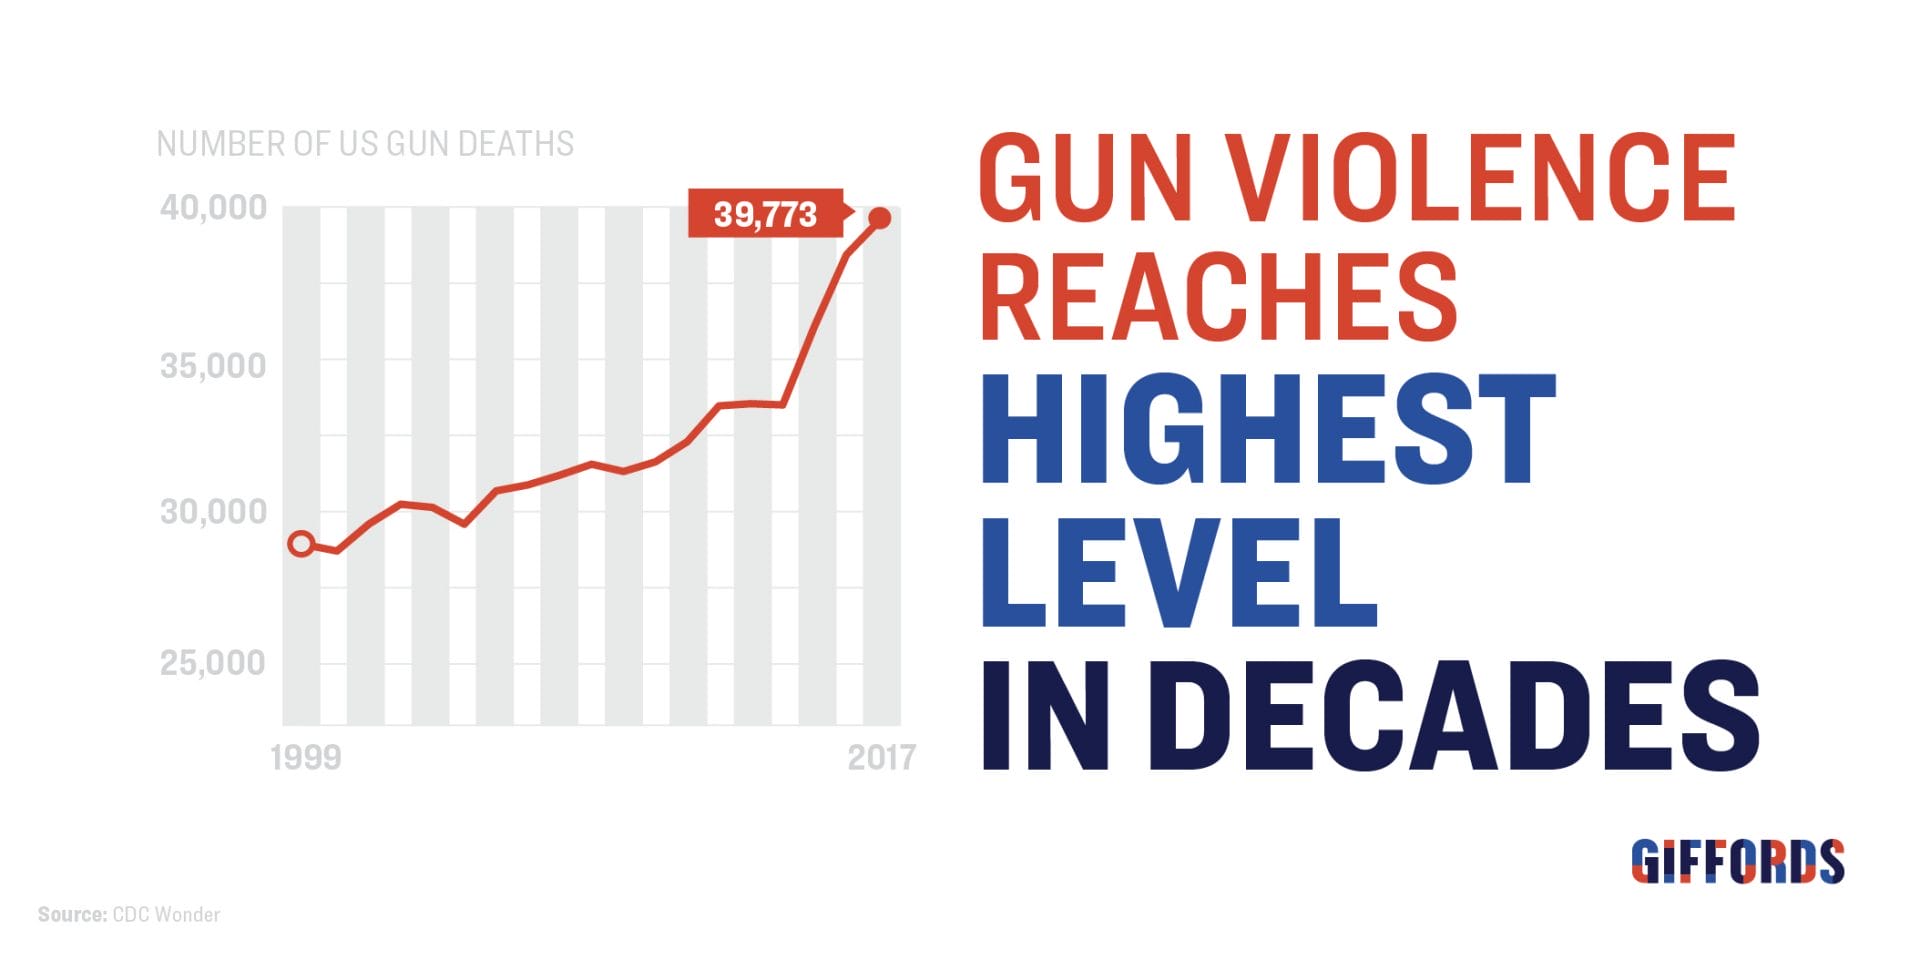 Gun violence reaches highest level in decades with US gun deaths per year rising from just under 30,000 to over 39,000 from 1999 to 2017. Source: CDC Wonder.